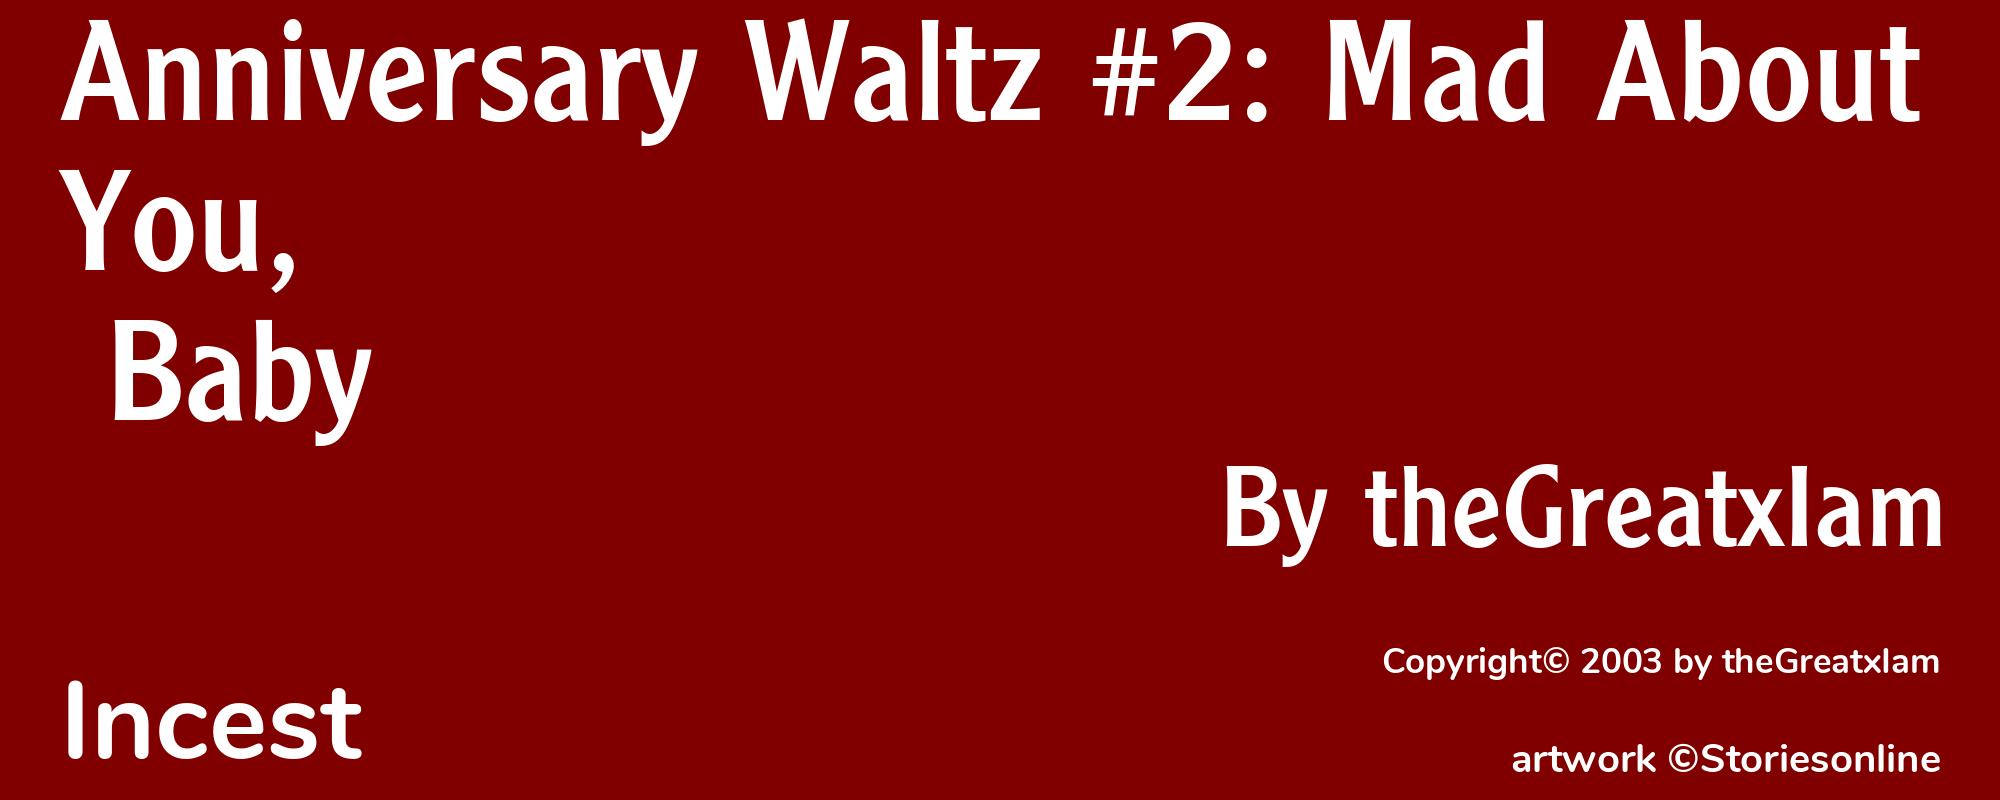 Anniversary Waltz #2: Mad About You, Baby - Cover